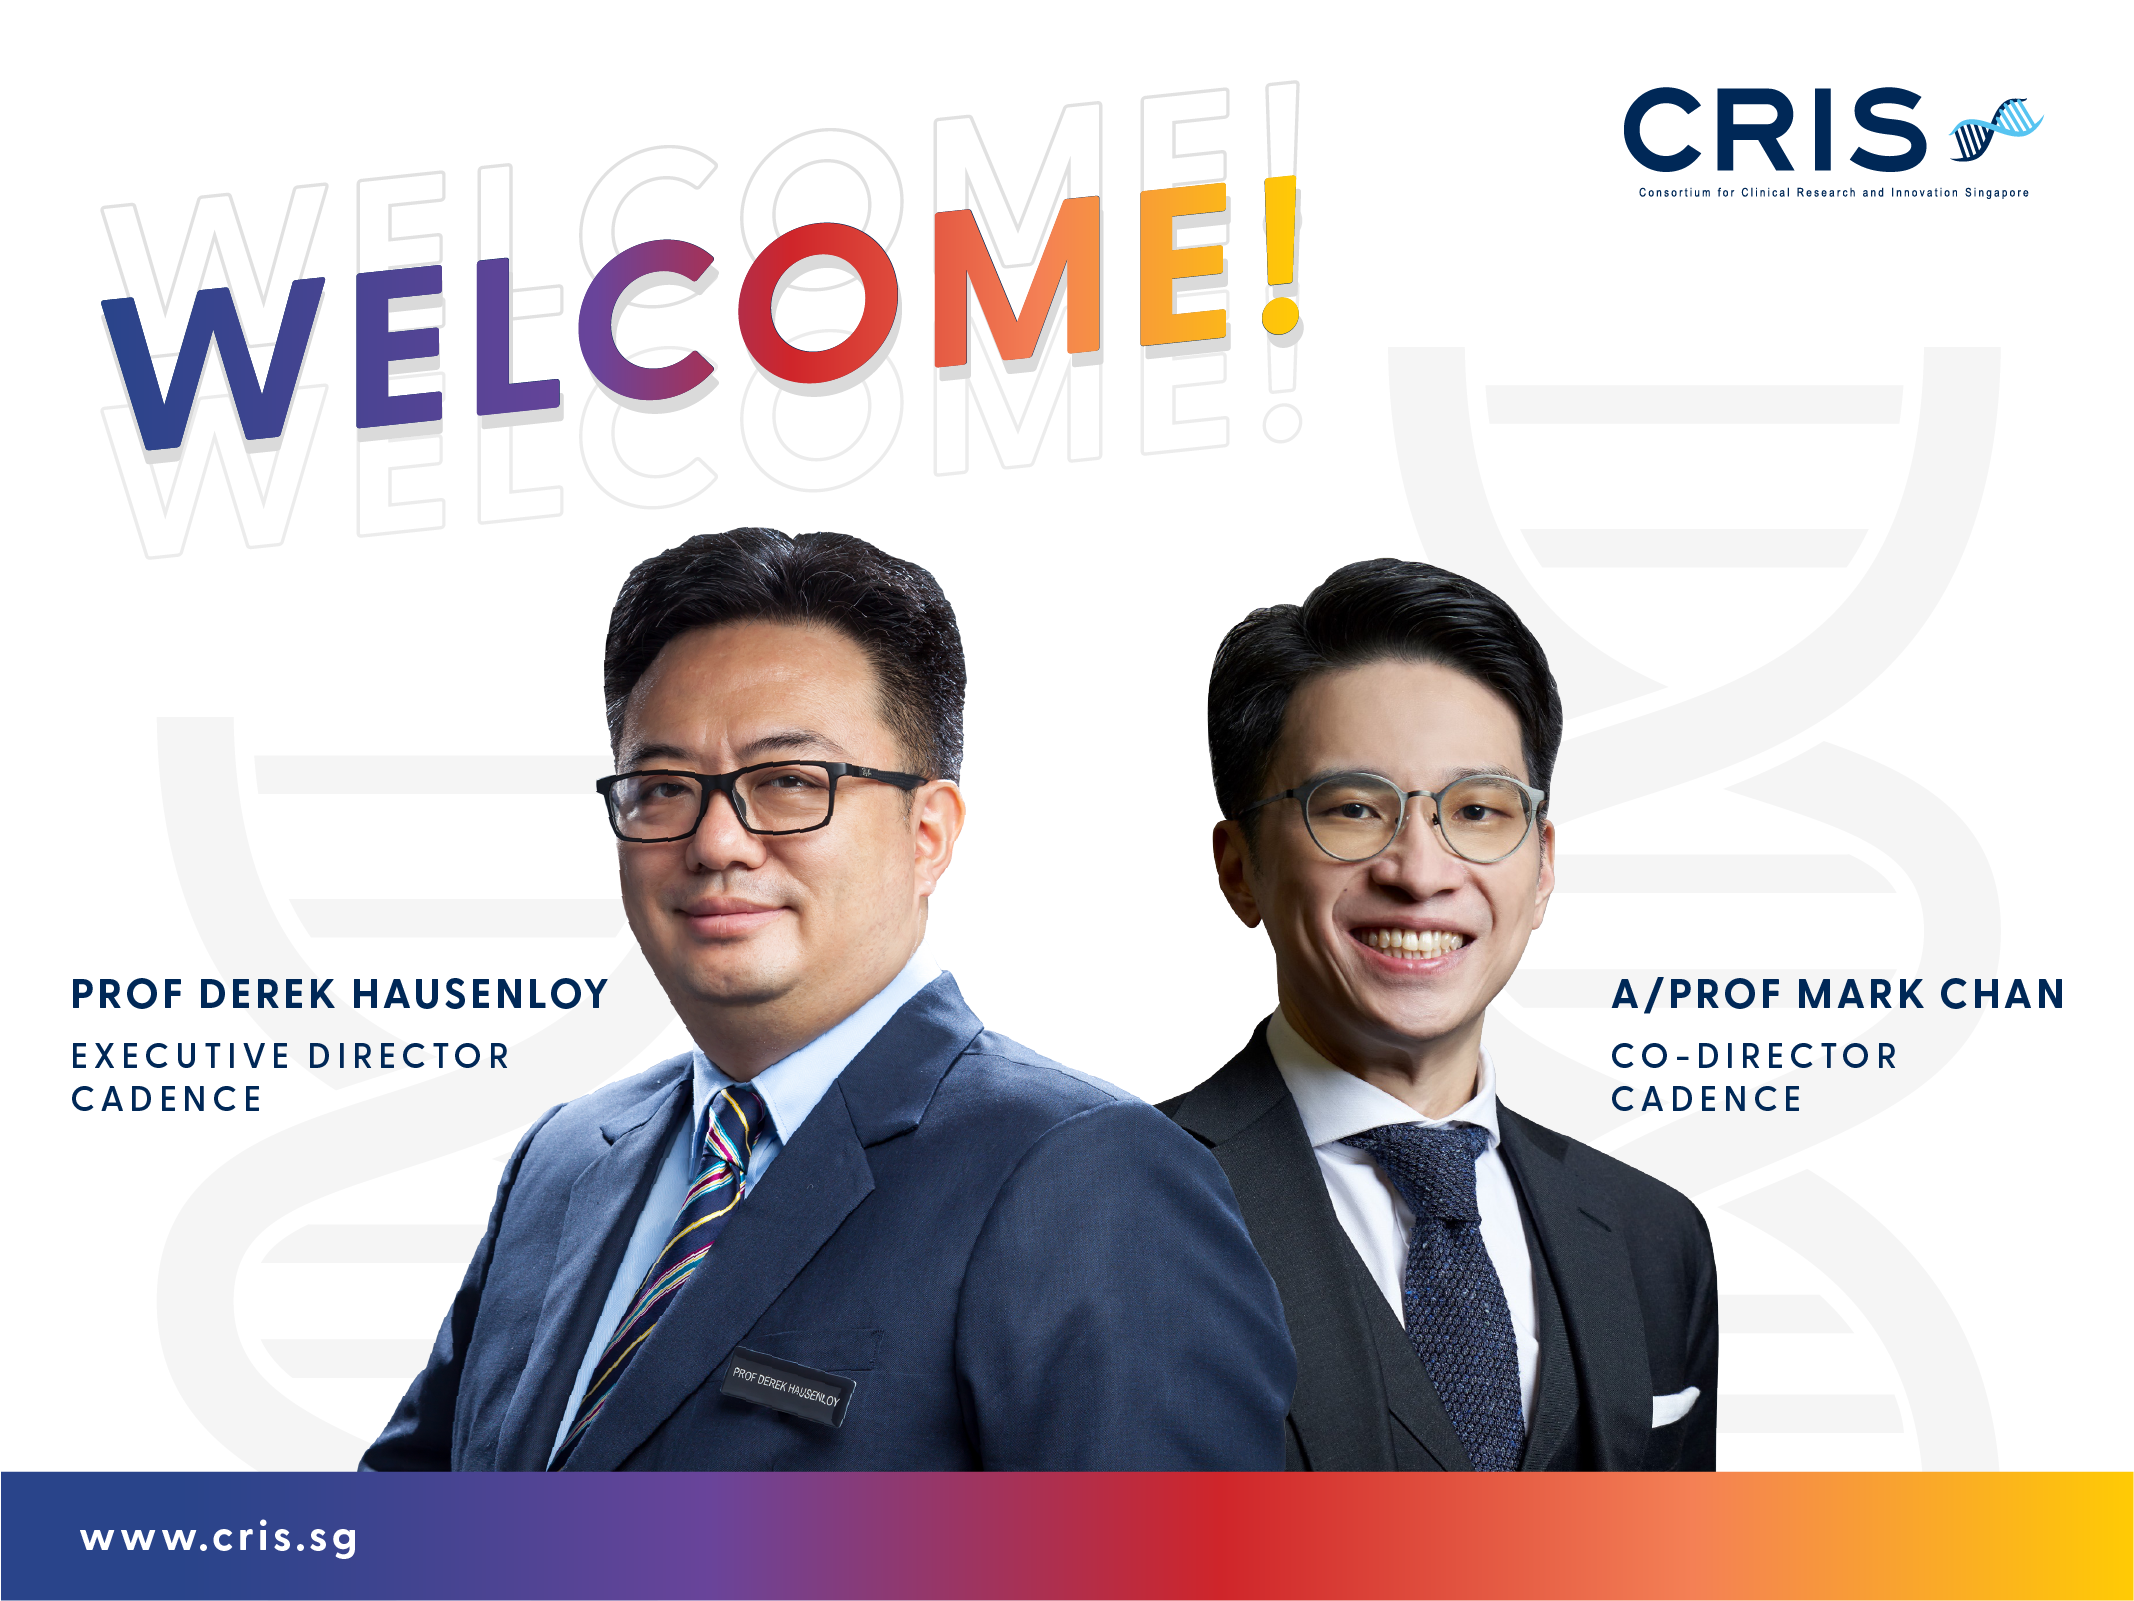 CRIS welcomes Prof Derek Hausenloy and A/Prof Mark Chan to CADENCE